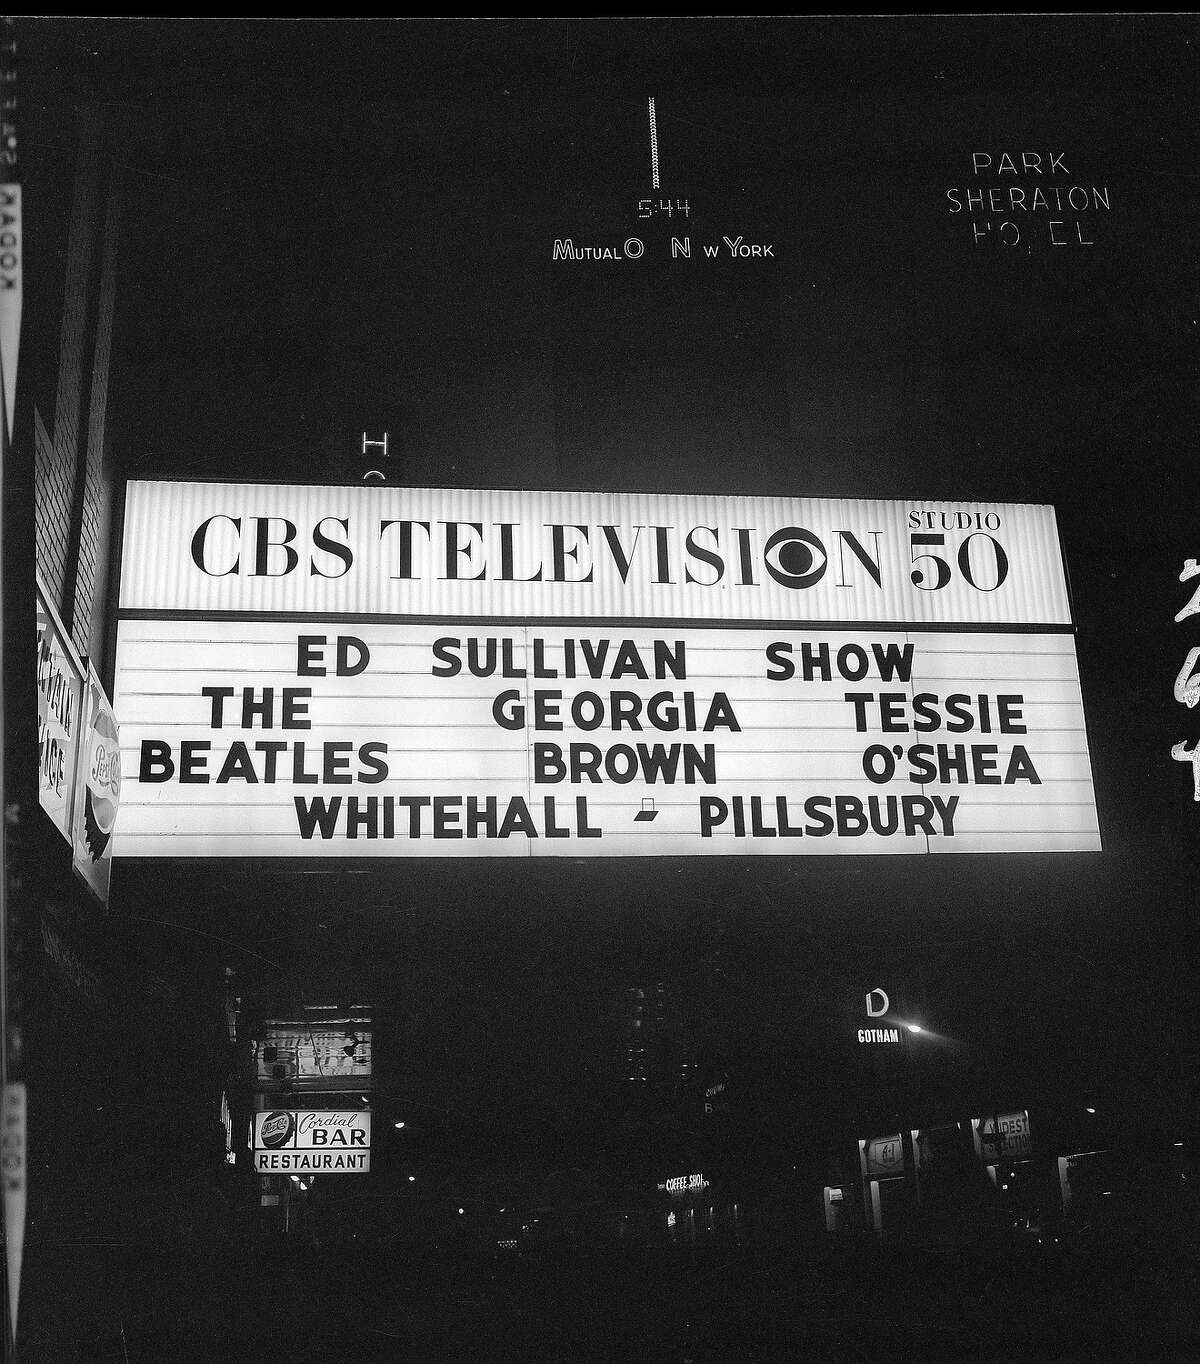 'The Ed Sullivan Show' marquee outside of CBS's Studio 50 in New York City lists the show's headlining acts.